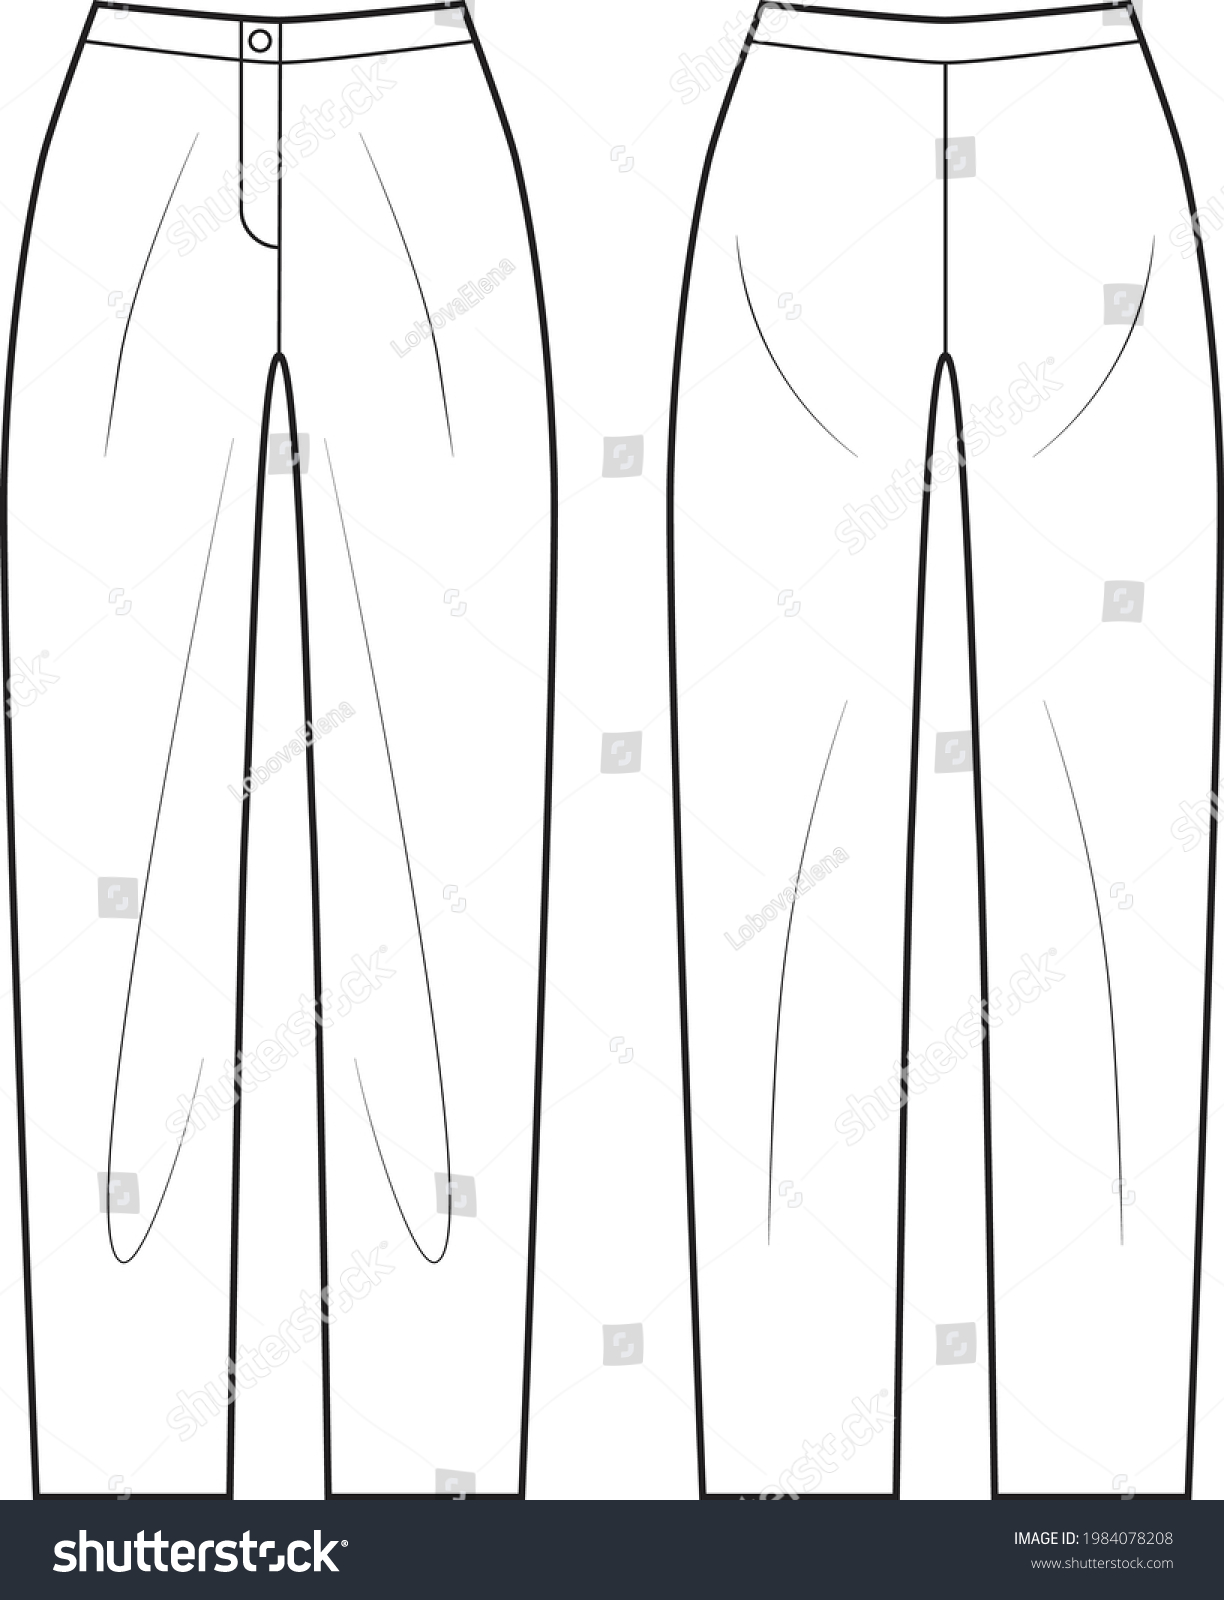 Technical Drawing Oversized Pants Stock Vector (Royalty Free ...